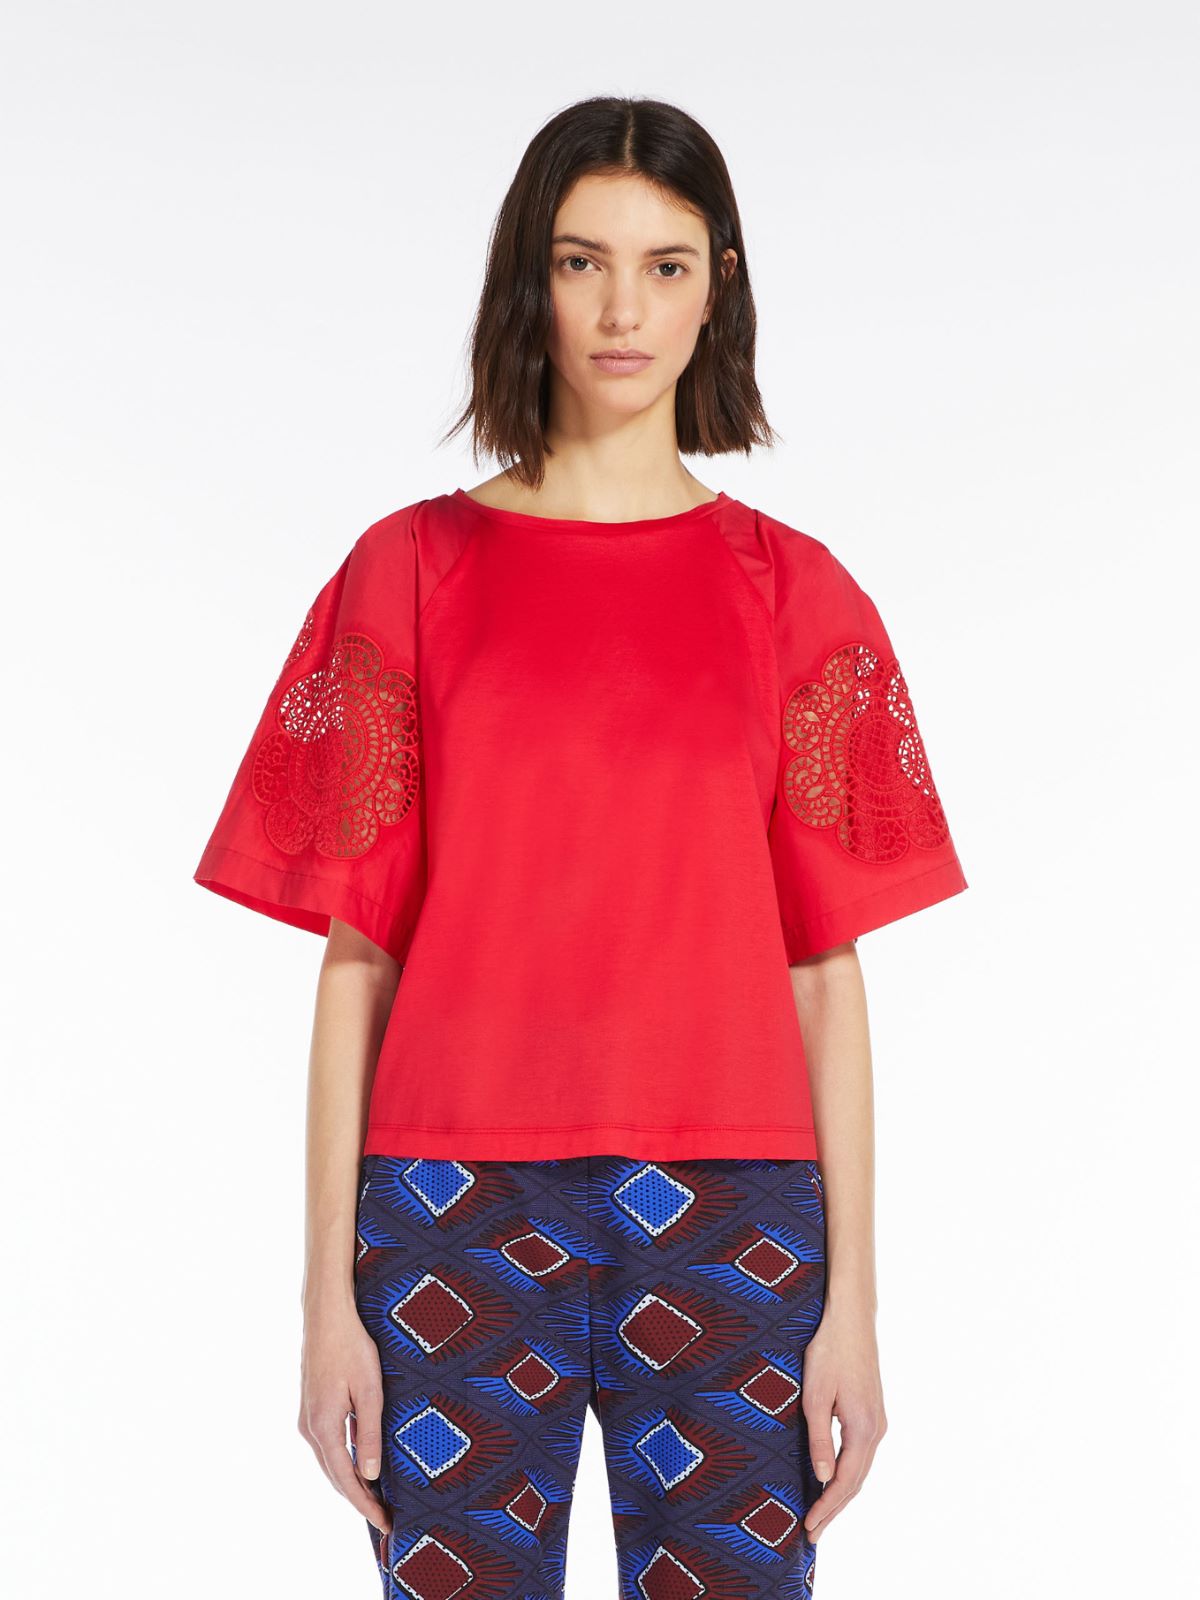 T-shirt in jersey di cotone - ROSSO - Weekend Max Mara - 2